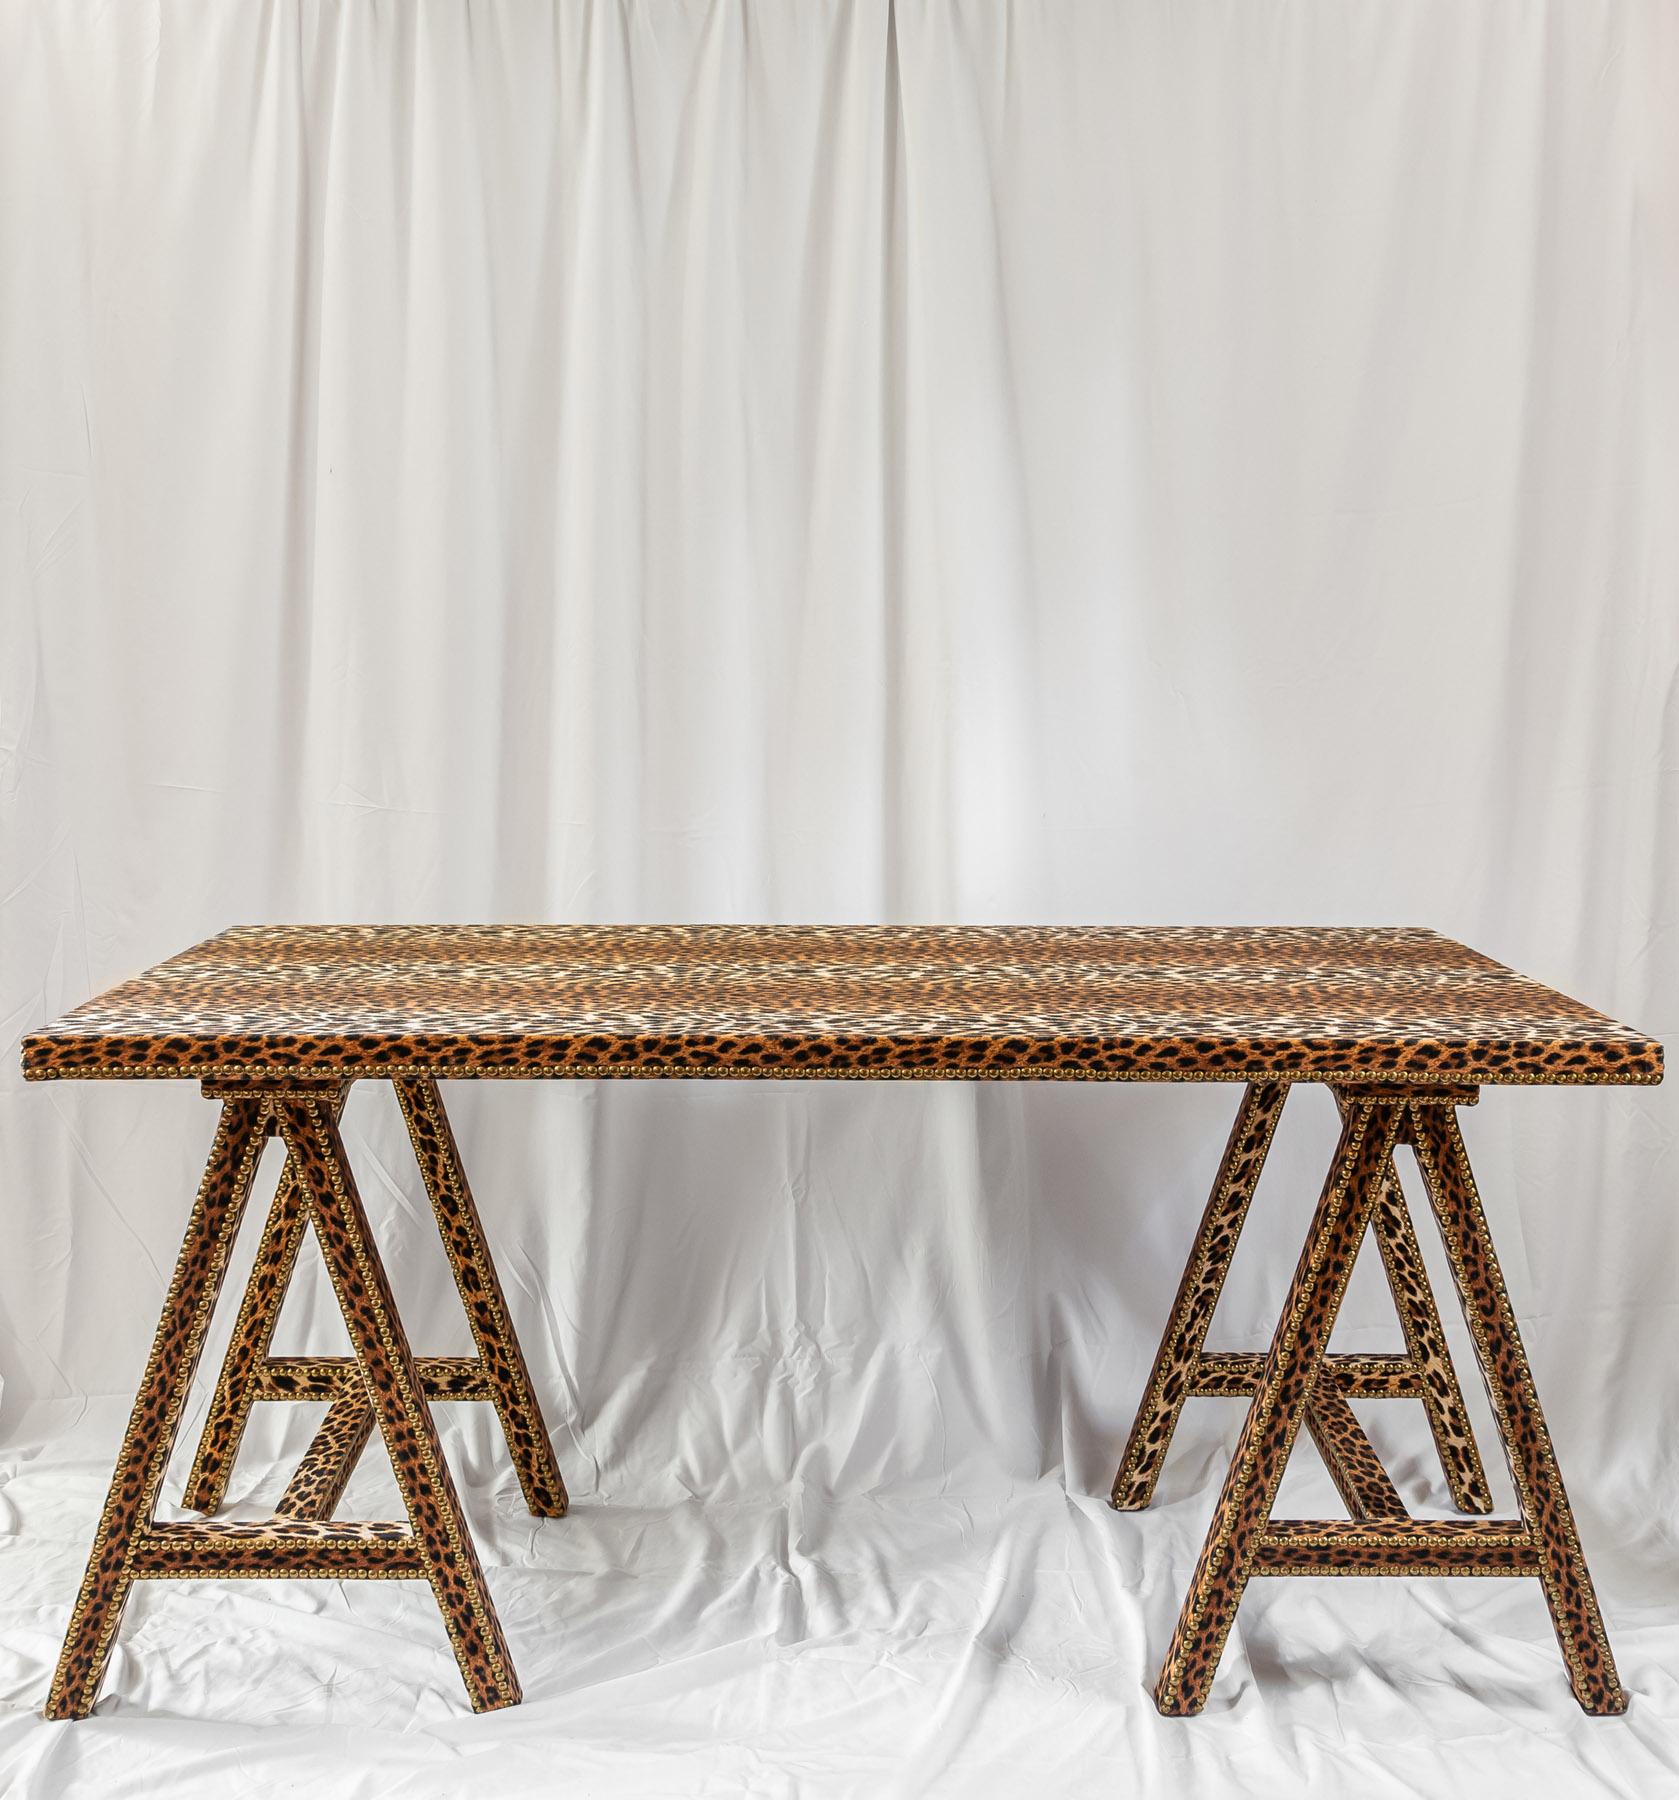 Based on a 1940’s upholstered trestle spotted in Isle sur la Sorgue one summer, this is a longstanding favourite that works equally well as a dining table, desk or dressing table. A truly versatile piece with a little extra flair. Using a classic